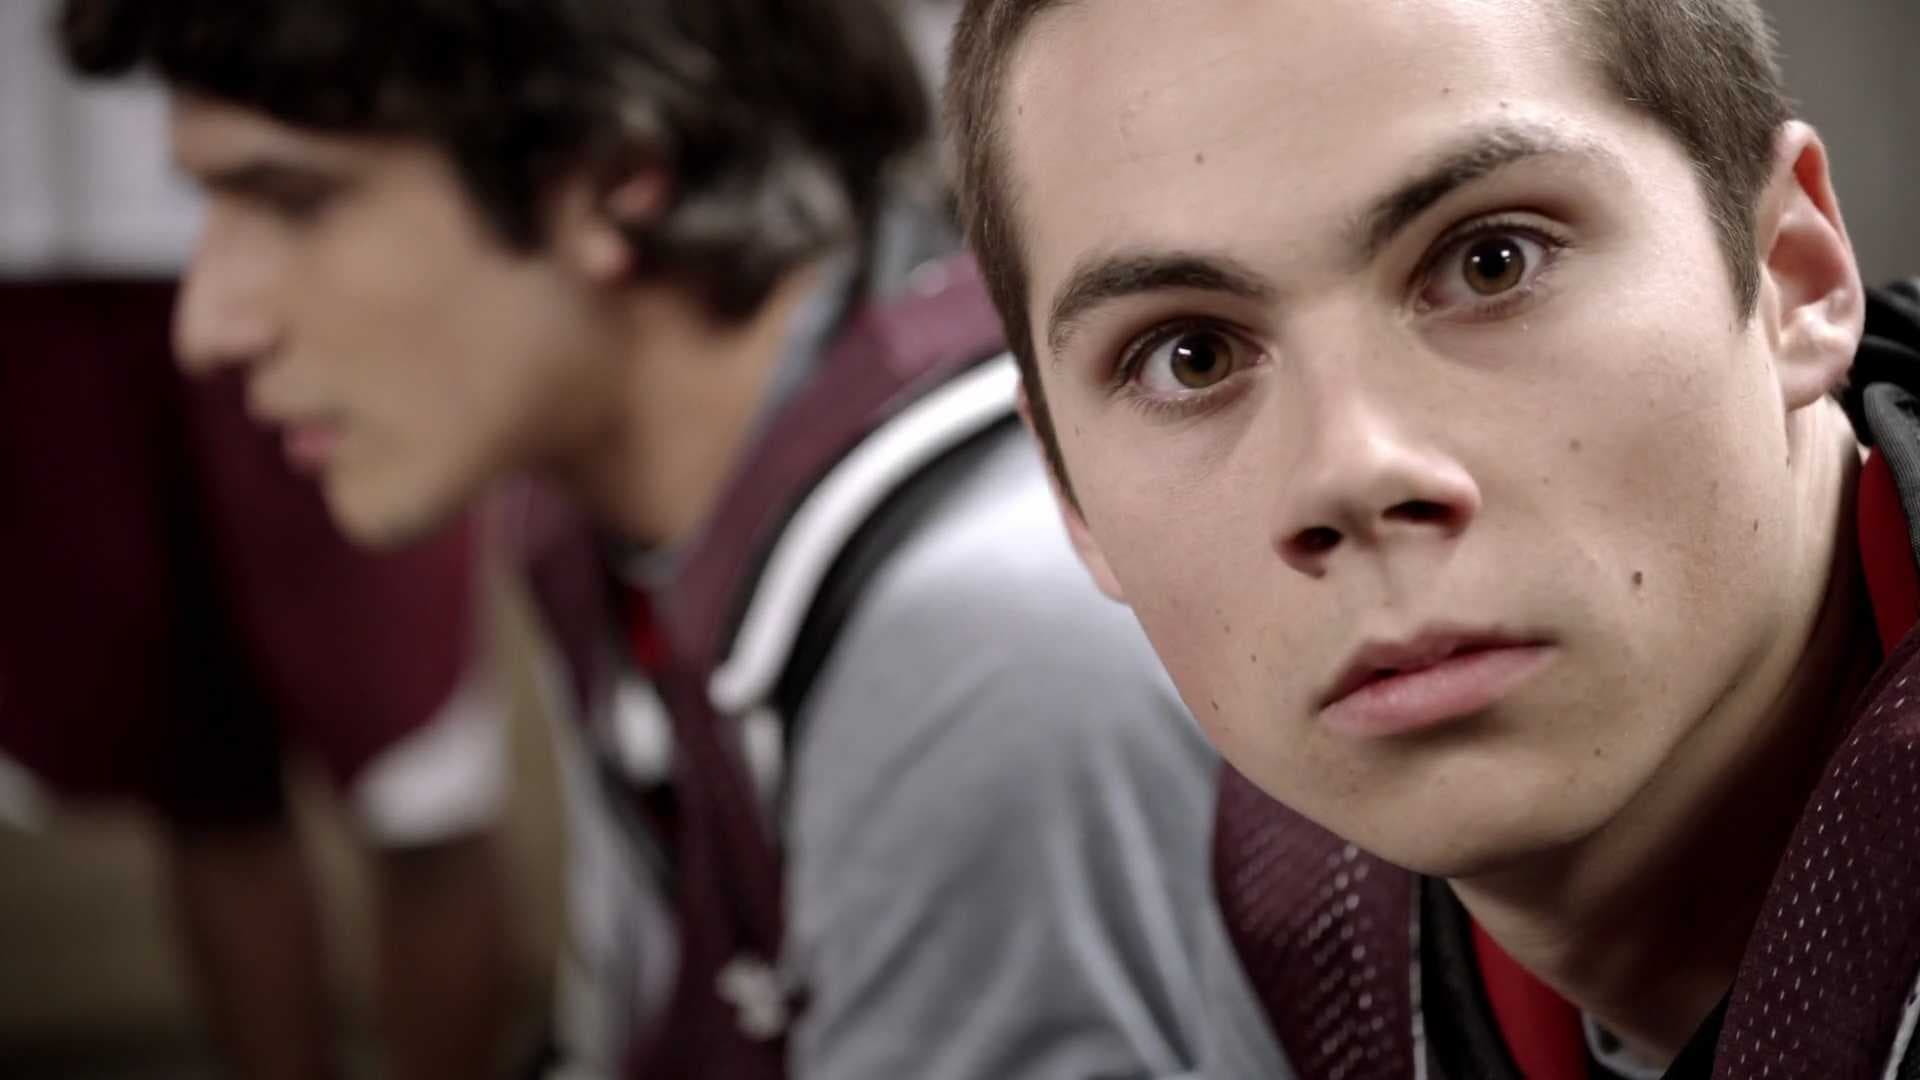 The hunt is on for Derek’s whereabouts, meanwhile Stiles tries to help Scot...